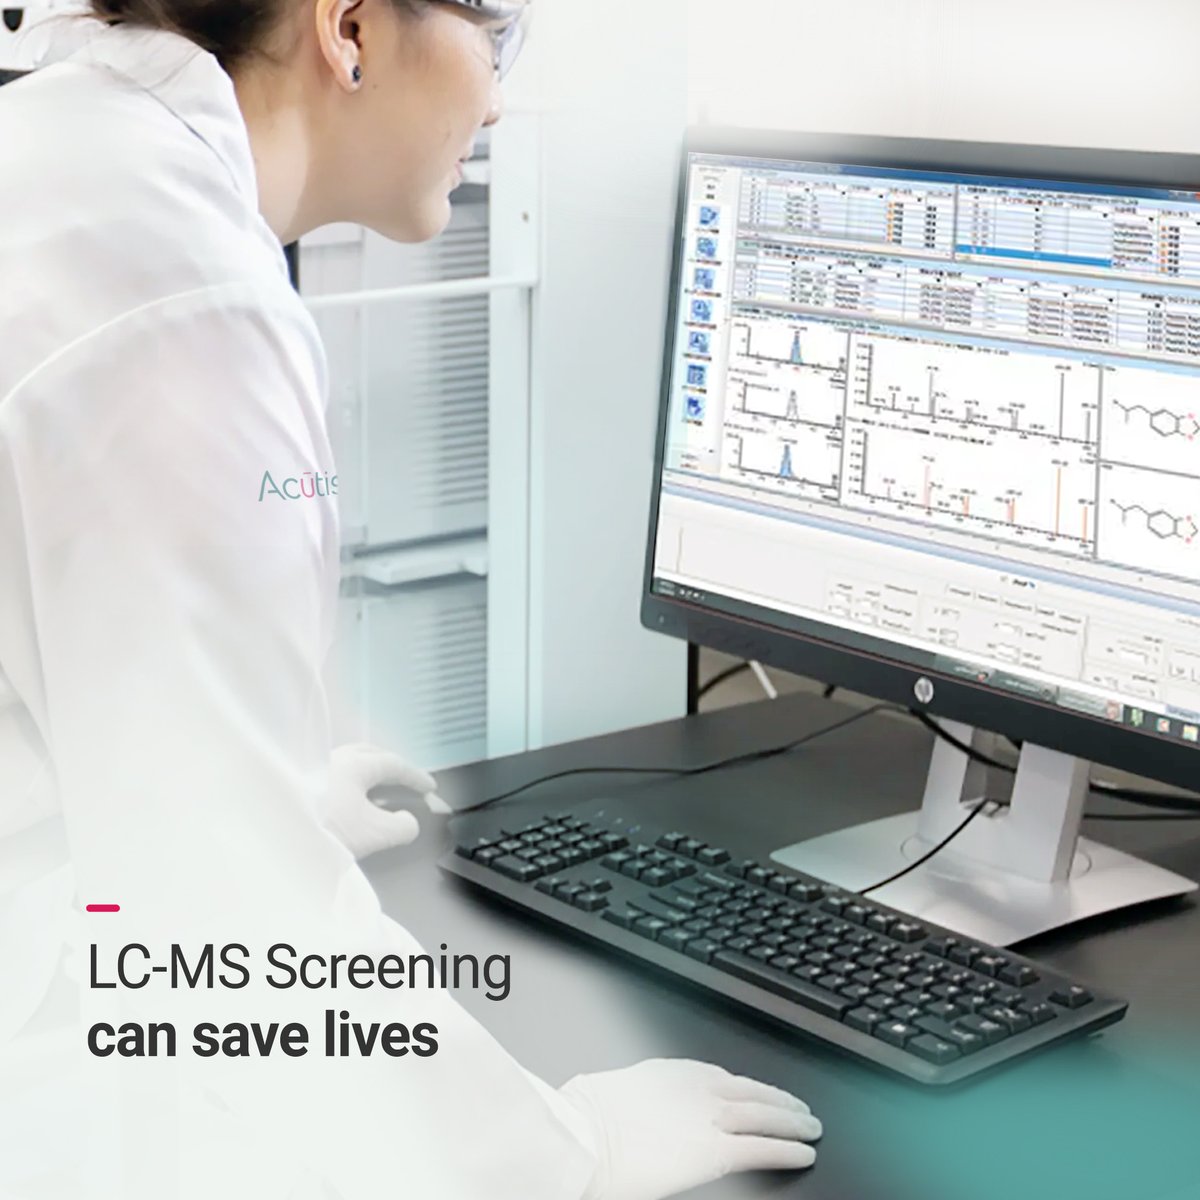 We support the specialists who prescribe controlled medications by providing accurate test results which are paramount to aiding patients in recovery. Learn more. >>  hubs.ly/Q01R2zVf0

#Acutis #ToxicologyLab #MedicationMonitoring #OpioidDependency #PainManagement